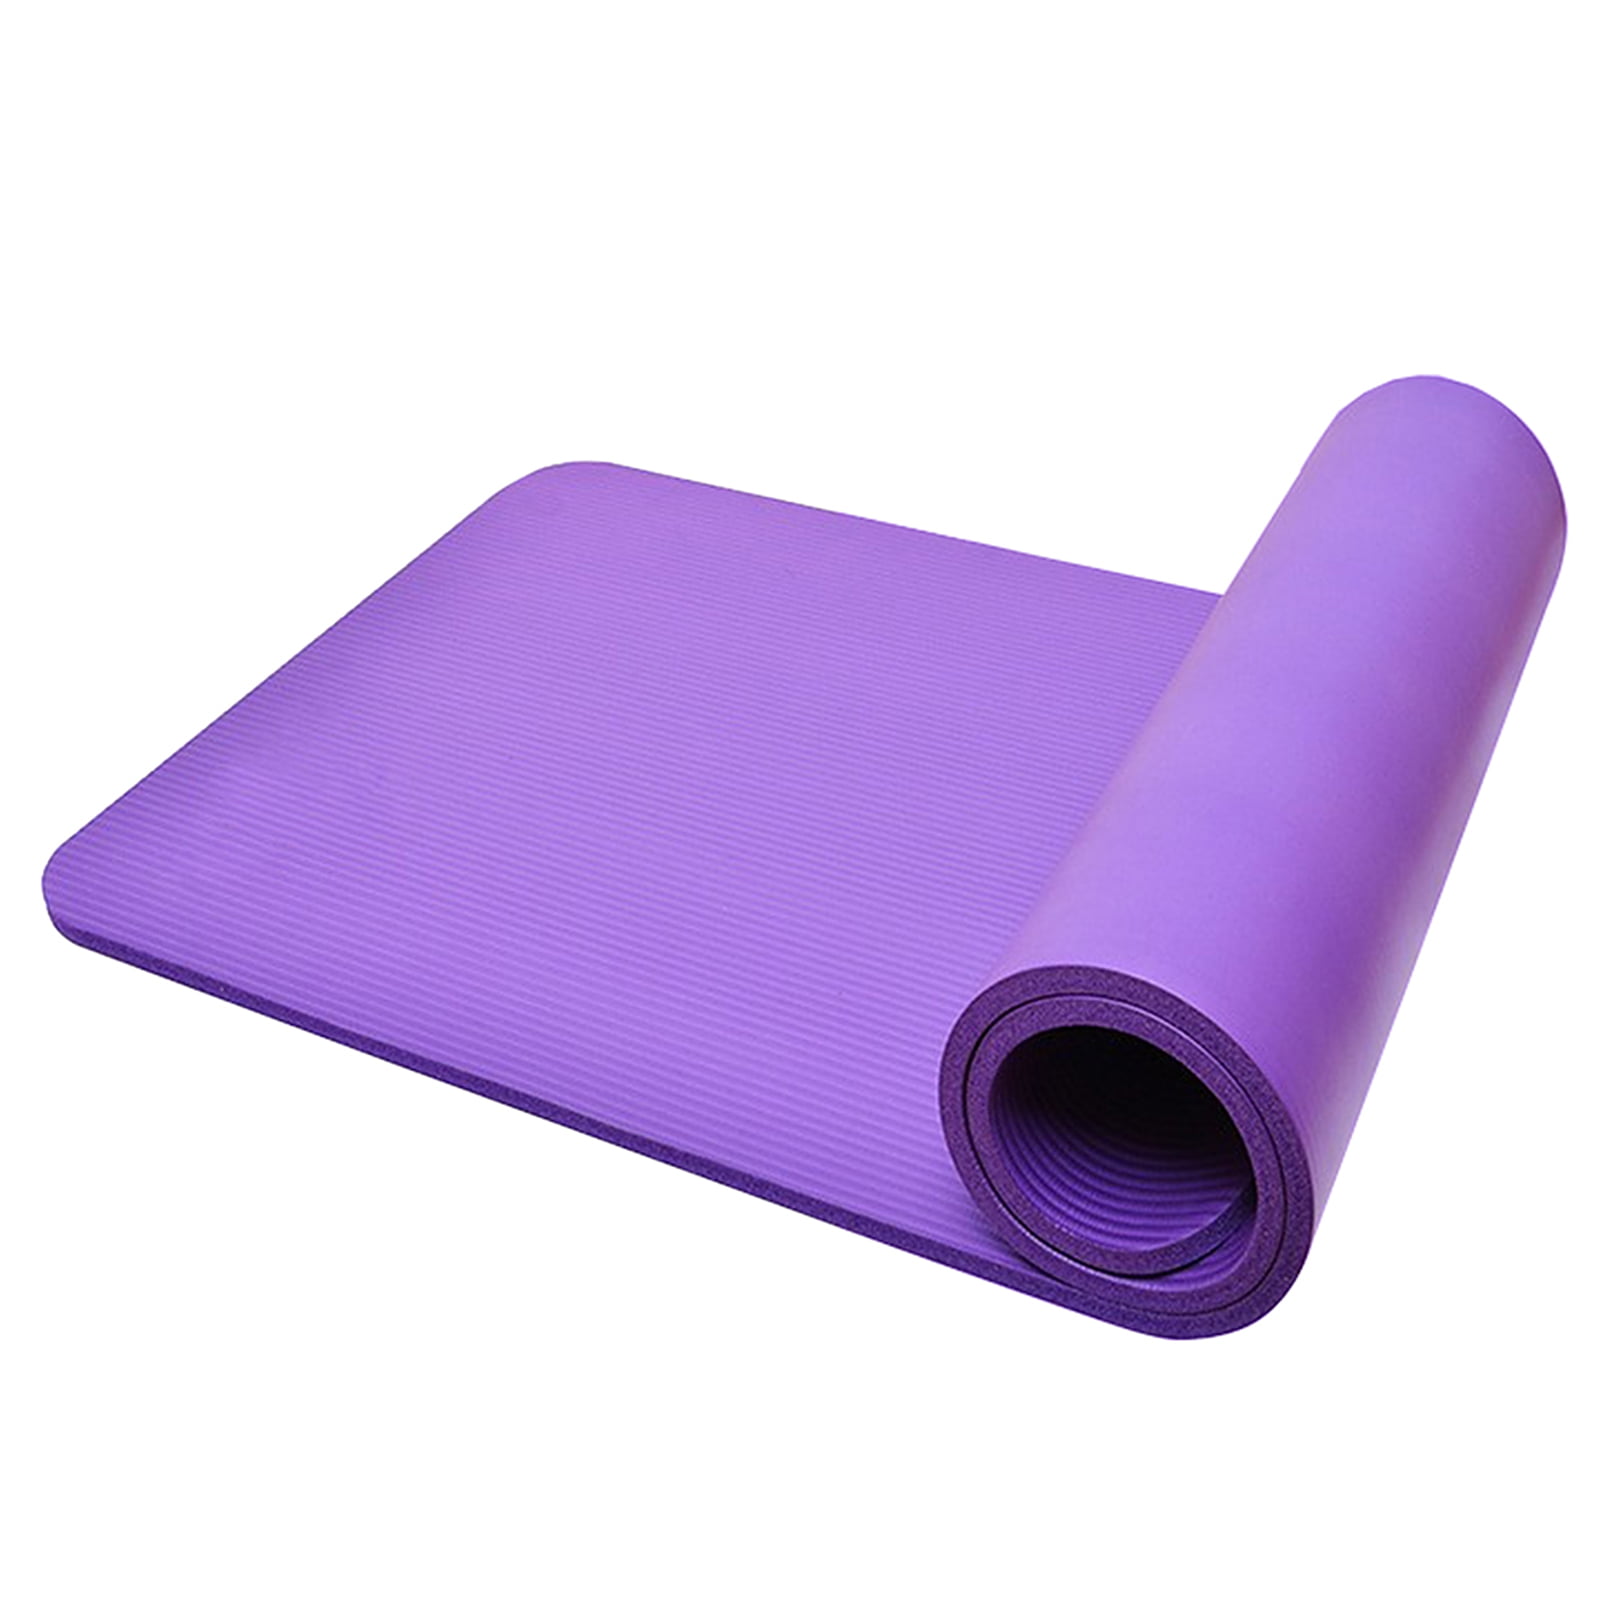 High Quality Thick Exercise Foam Yoga Mat Non-Slip Durable Gym Fitness Pilates 